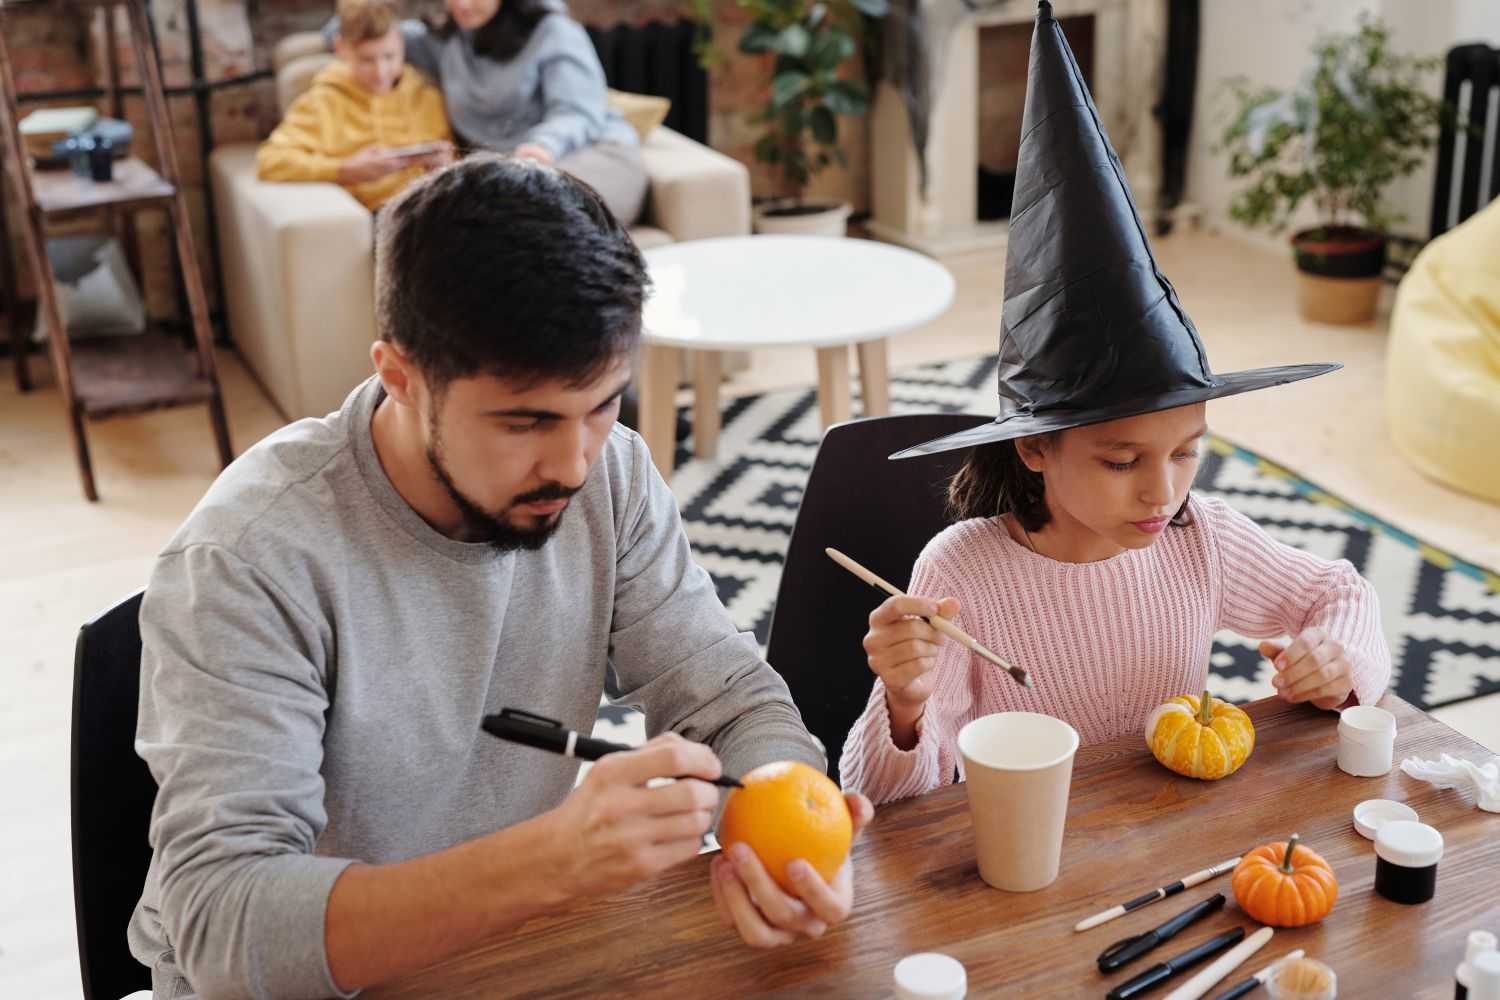 Stay at Home Halloween Games father and daughter are making Halloween DIY crafts